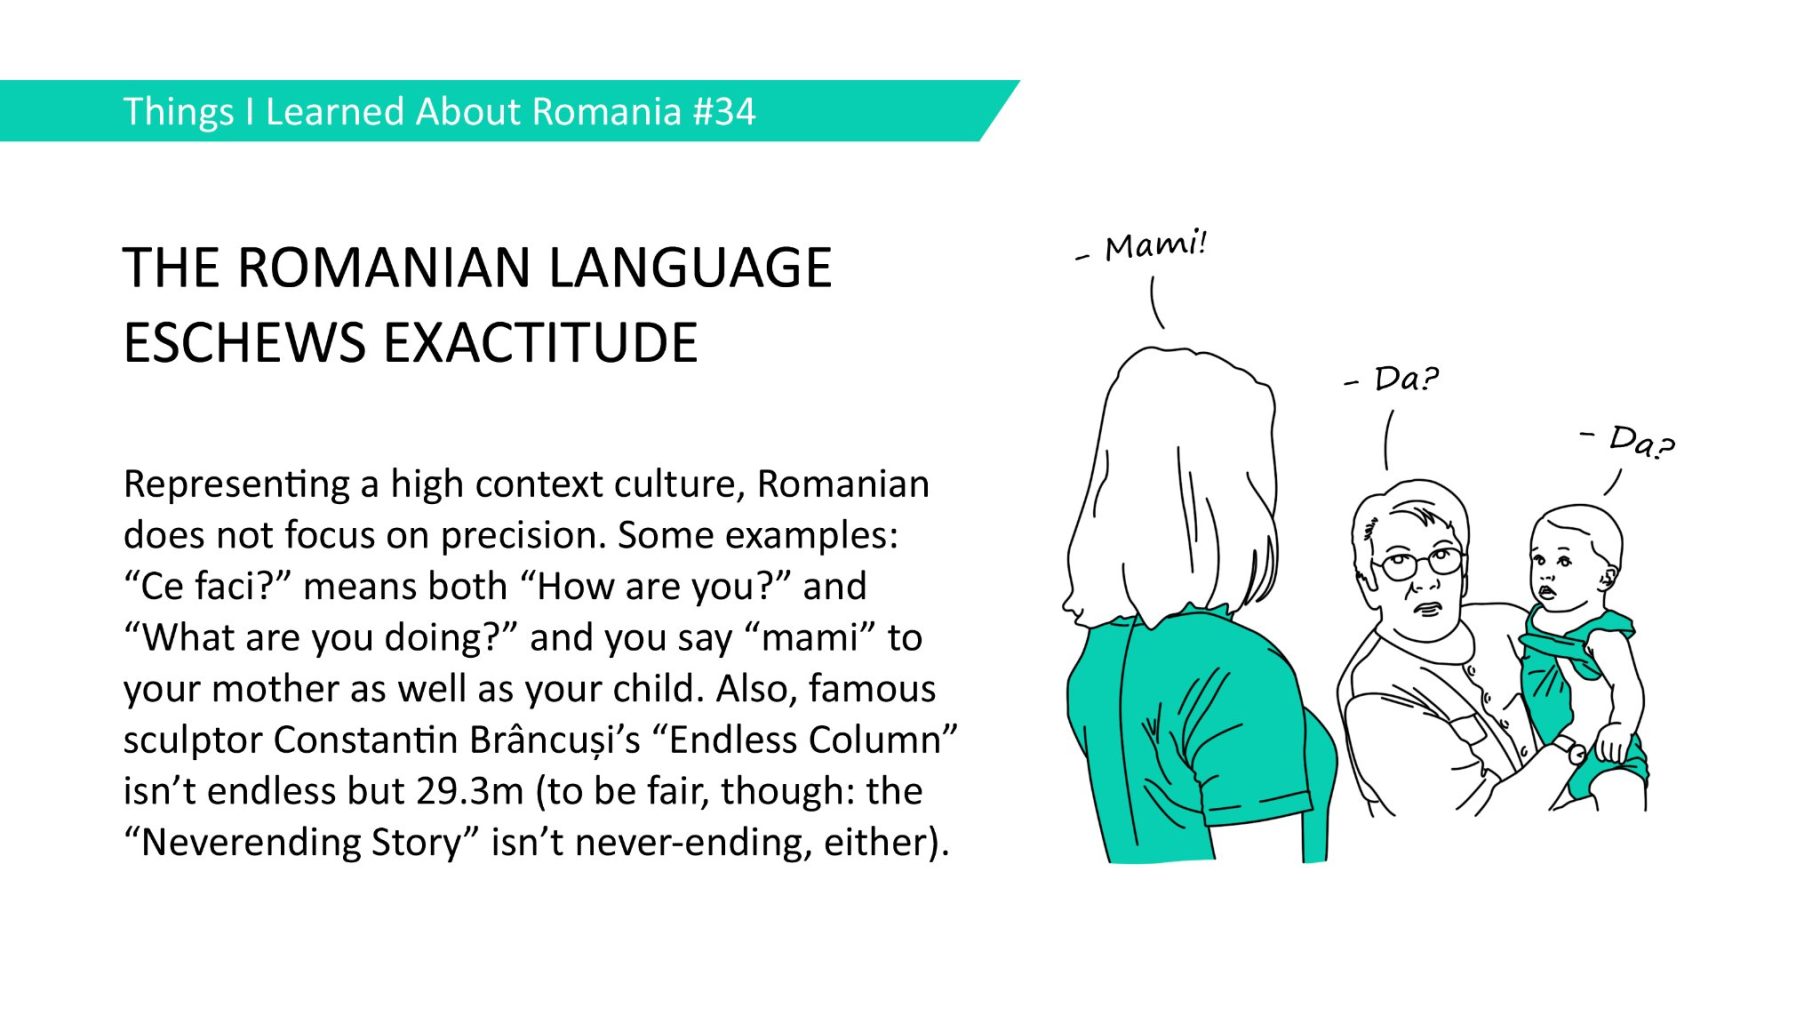 THE ROMANIAN LANGUAGE ESCHEWS EXACTITUDE - Representing a high context culture, Romanian does not focus on precision. Some examples: "Ce faci?" means both "How are you?" and "What are you doing?" and you say "mami" to your mother as well as your child. Also, famous sculptor Constantin Brâncusi's "Endless Column' isn't endless but 29.3m (to be fair, though: the "Neverending Story" isn't never-ending, either).